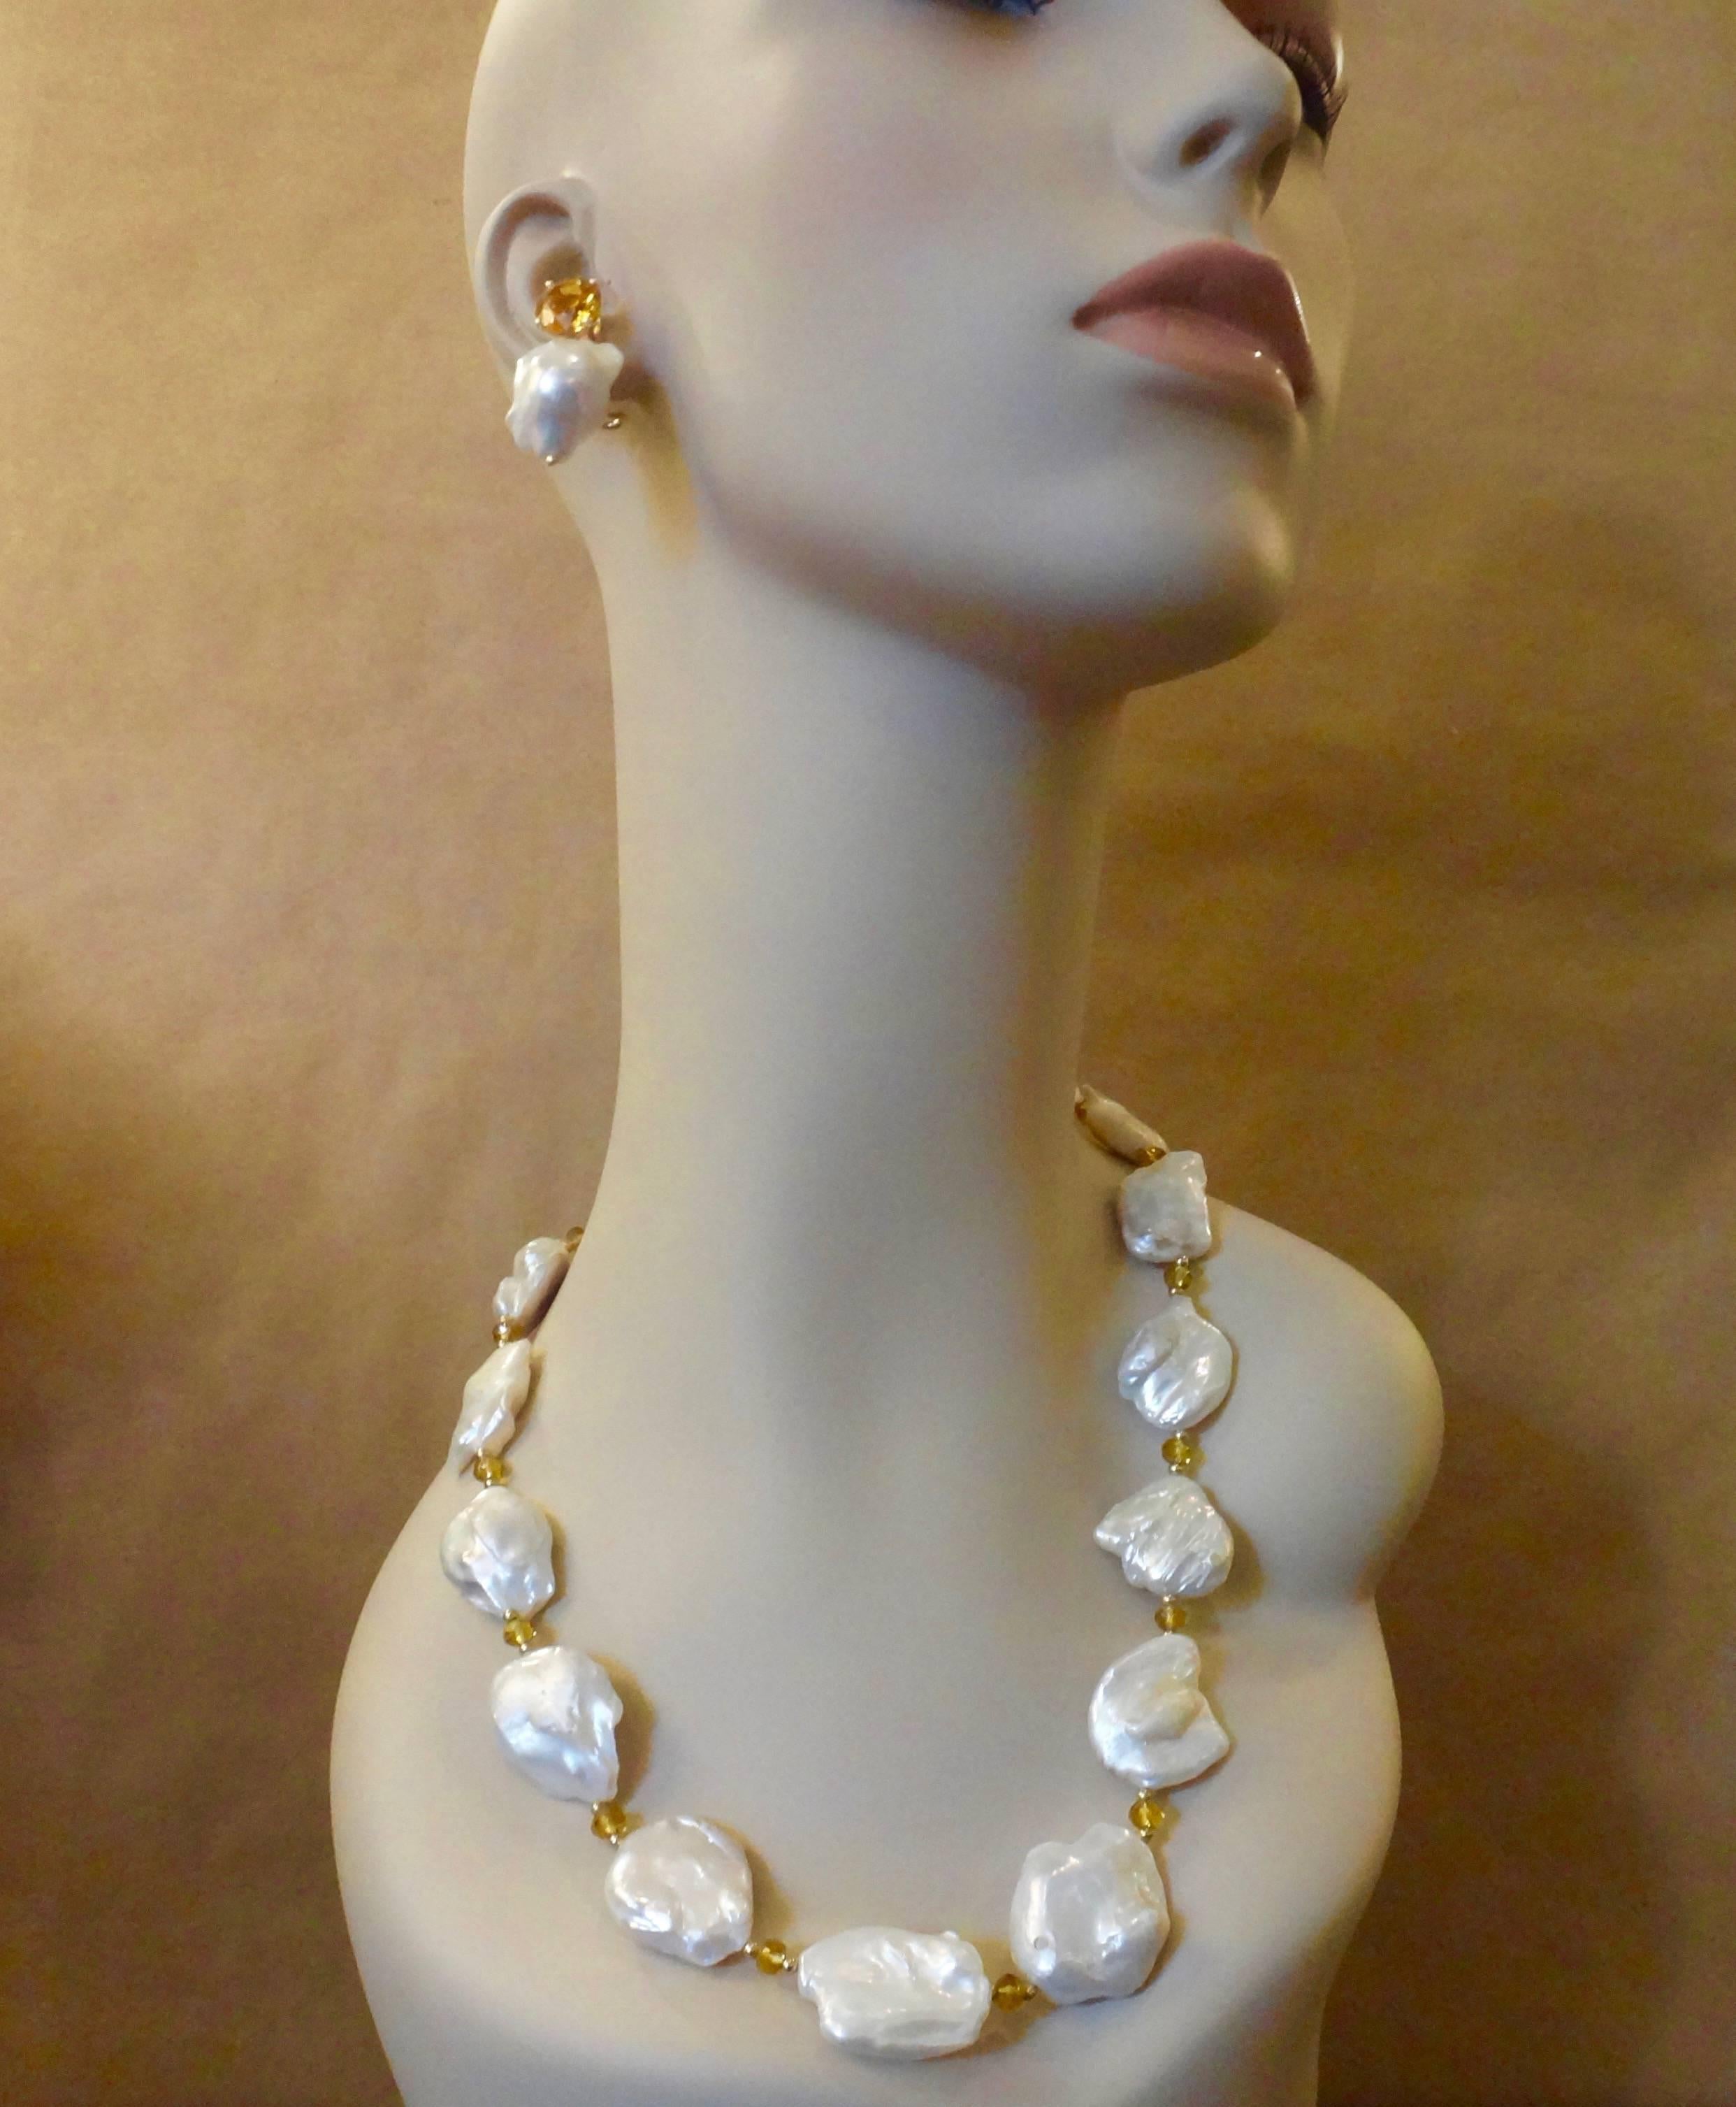 Fifteen giant (up to 40mm) white Keshi pearls form this striking necklace.  The lustrous baroque pearls are spaced with golden citrine rondelles and small gold beads.  The necklace is finished with a vermeil hook and eye clasp for an easy on and